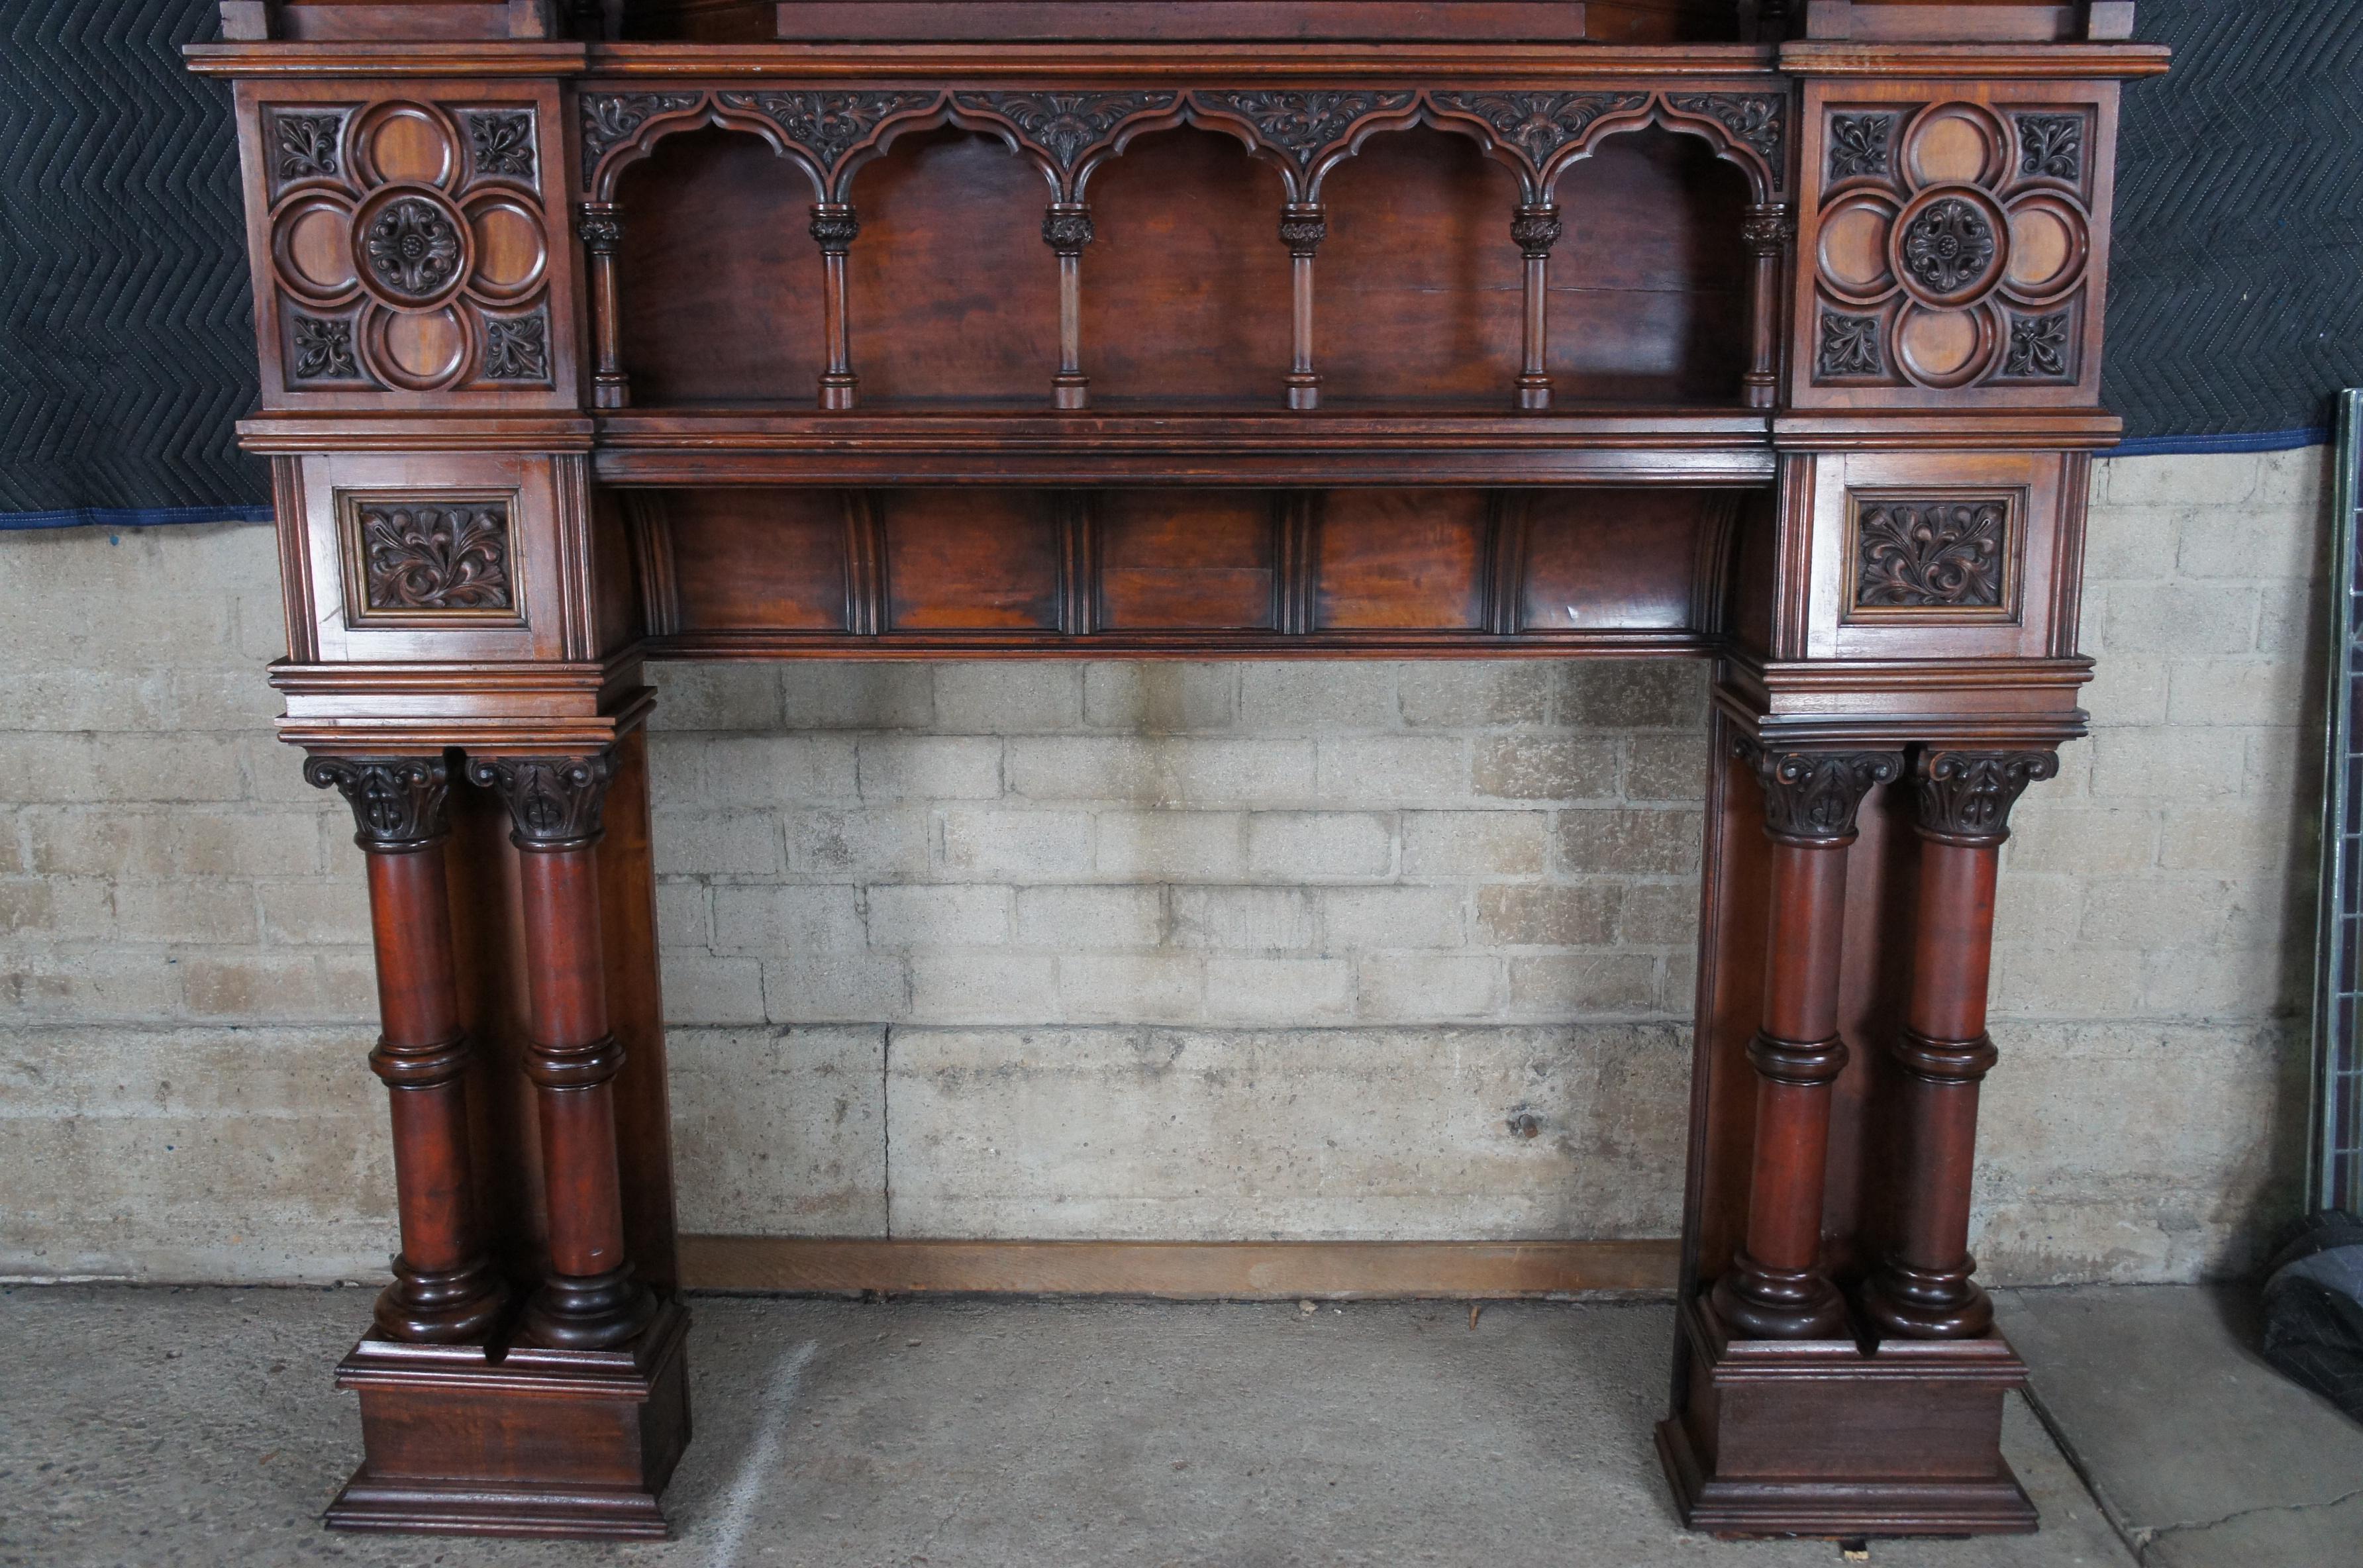 Monumental Rare Antique Renaissance Revival Gothic Walnut Fireplace Mantel 11 FT In Good Condition For Sale In Dayton, OH